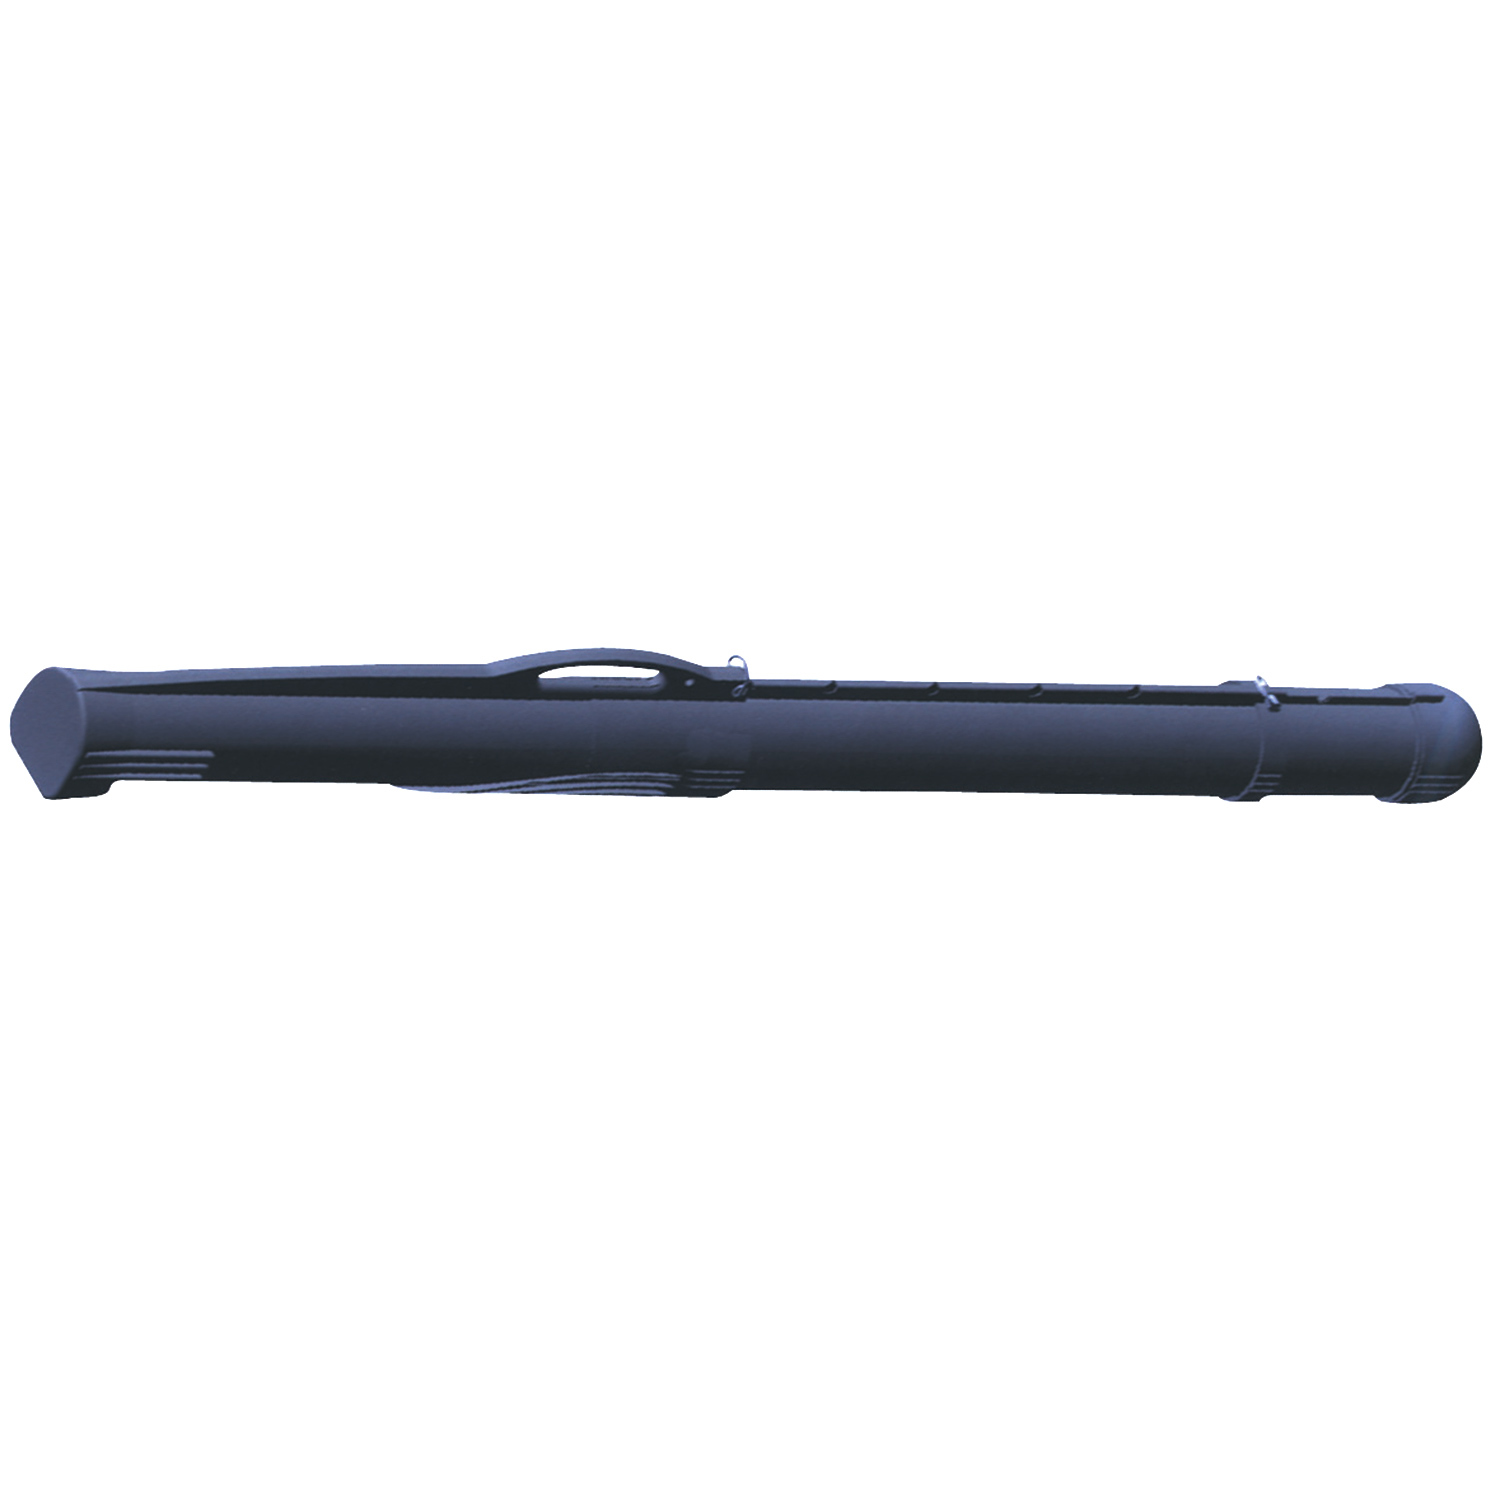 PLANO Airliner Telescoping Rod Case